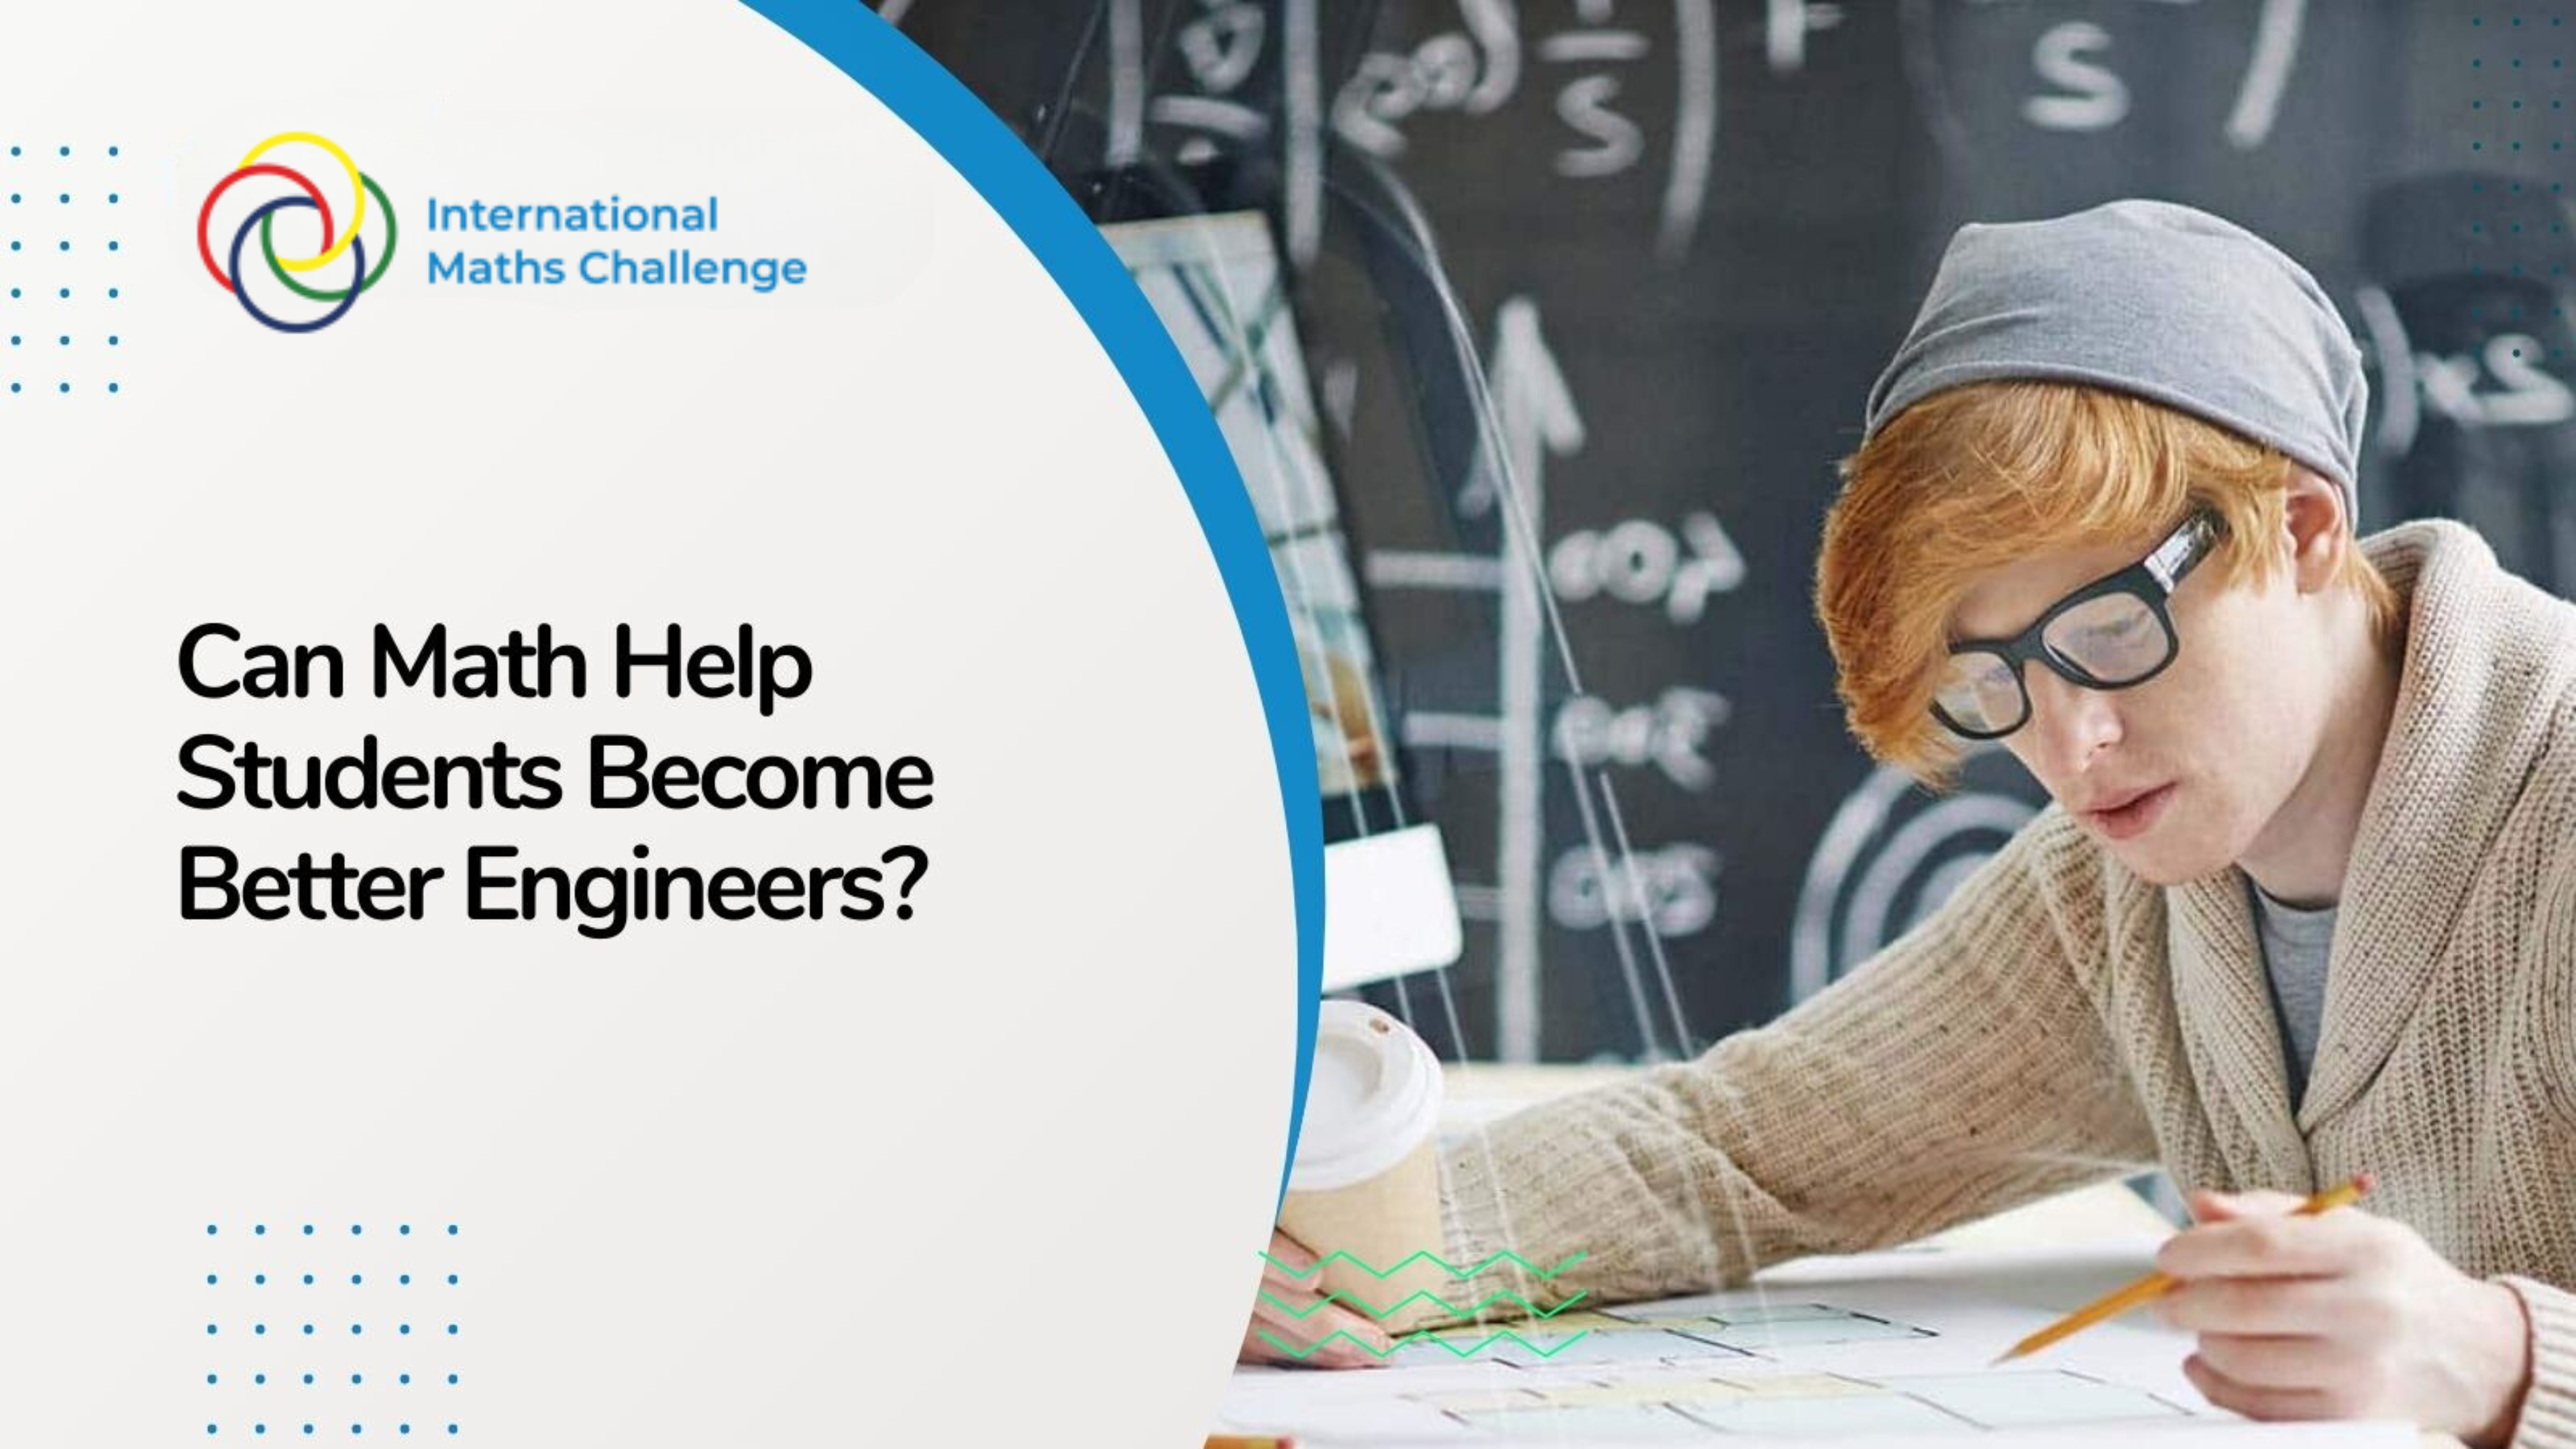 Can Math Help Students Become Better Engineers?